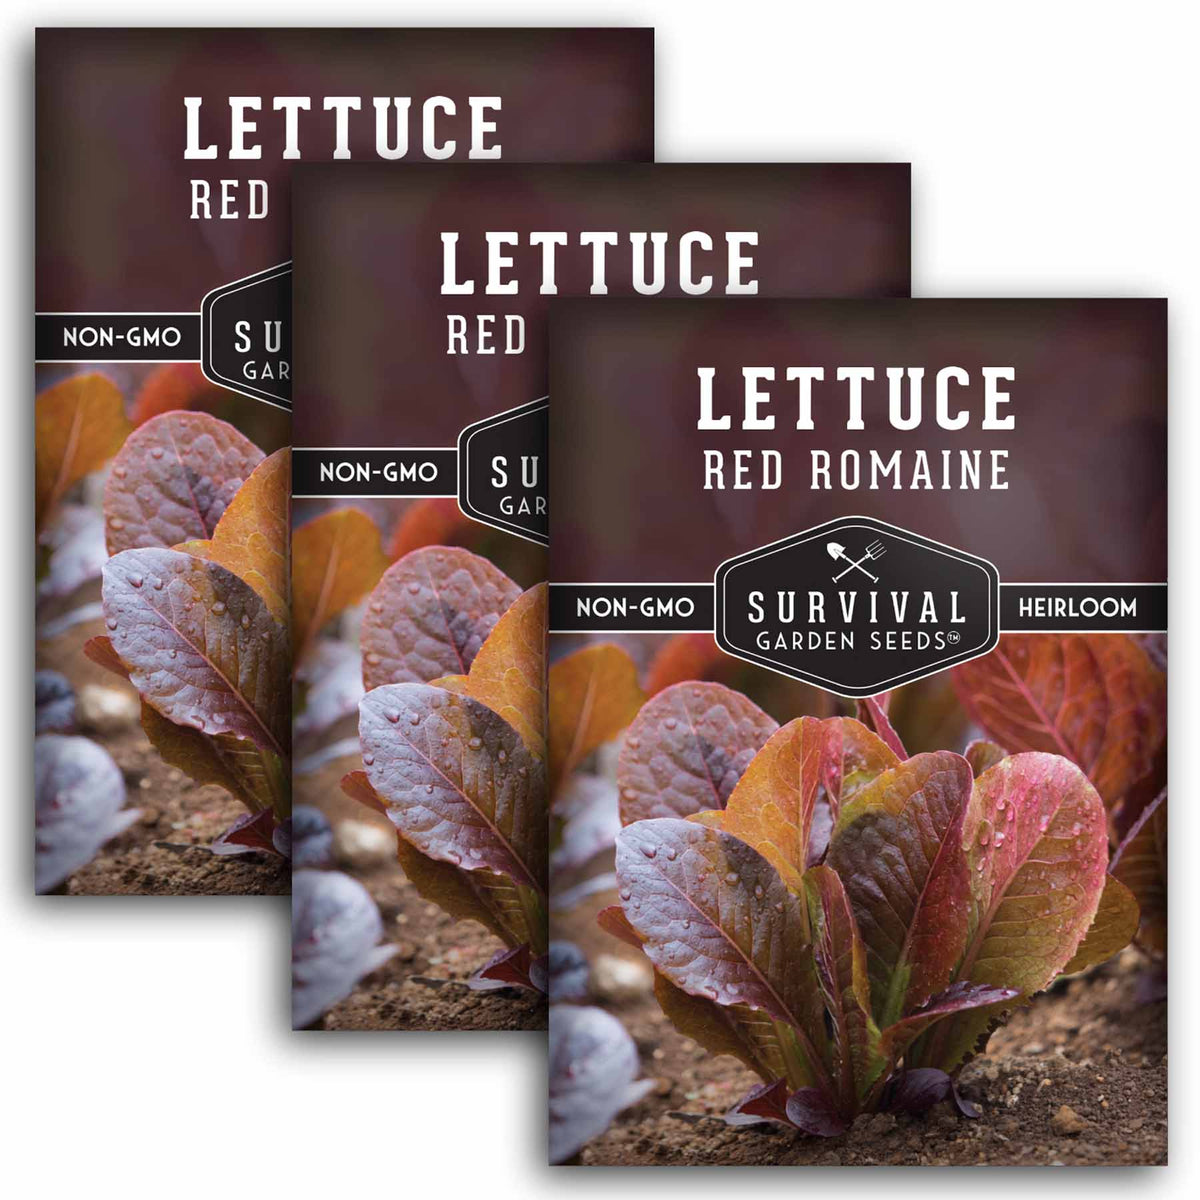 3 packets of Red Romaine Lettuce seeds